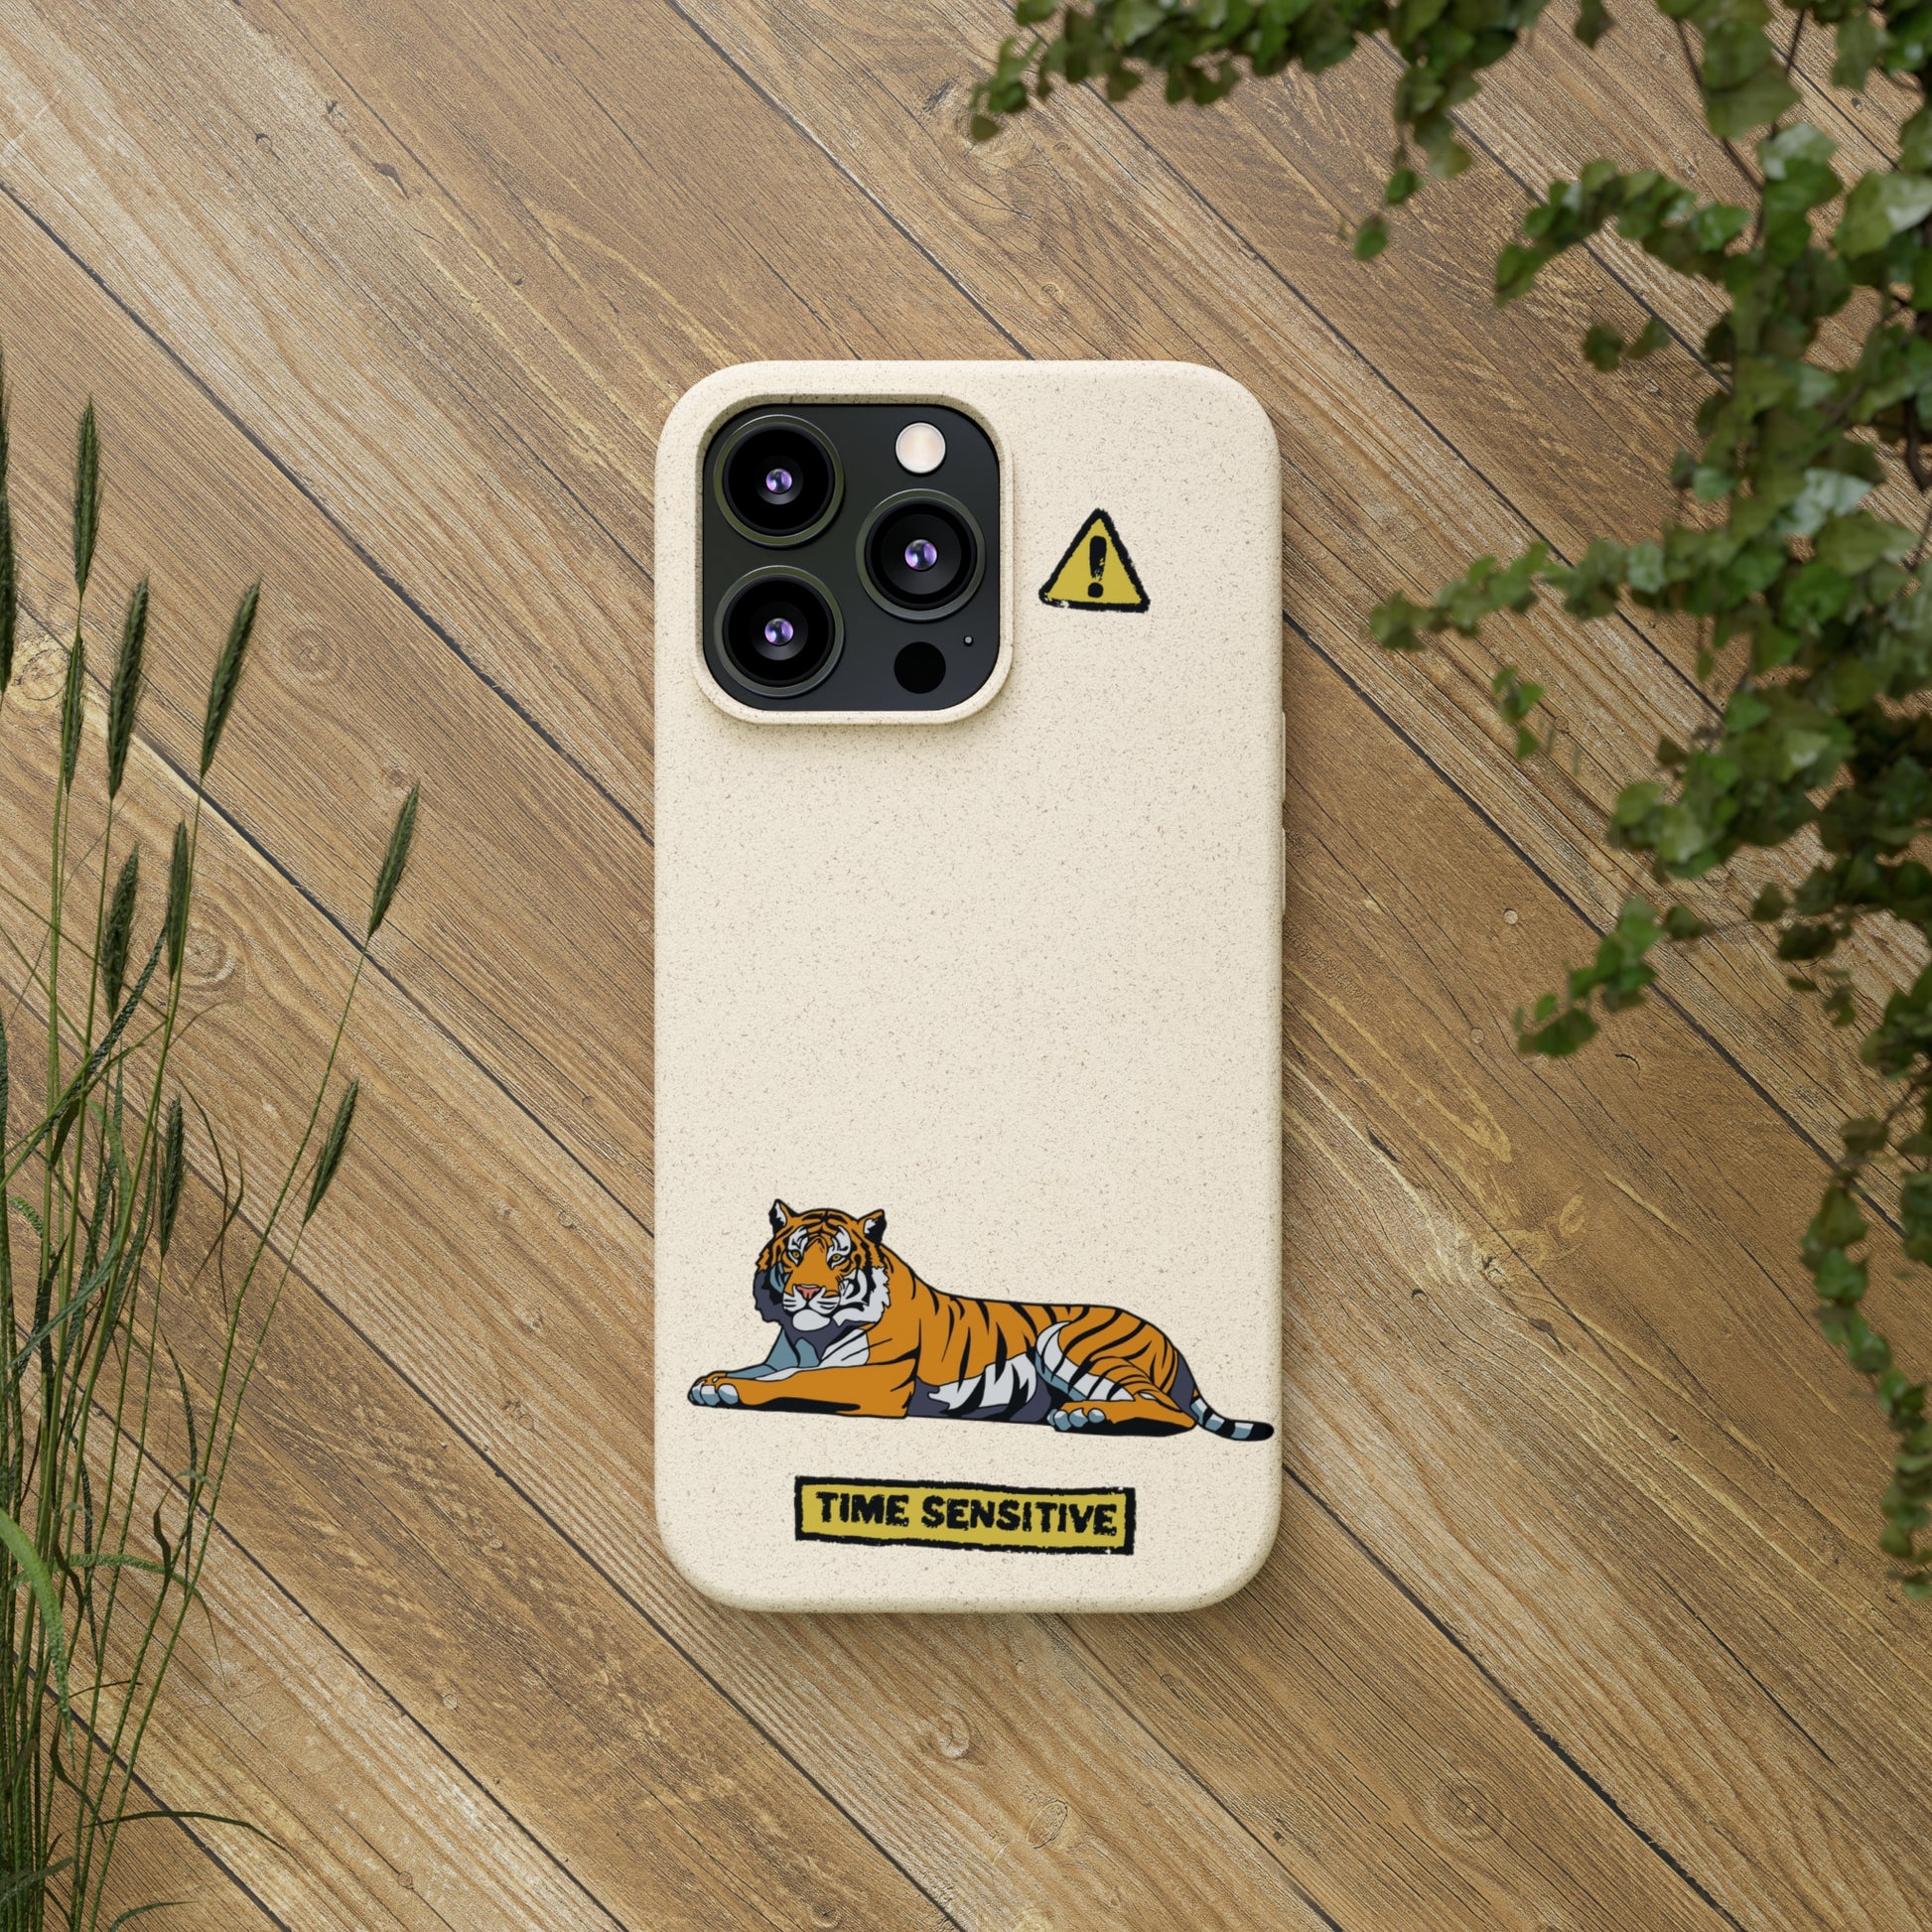 The back of The Tiger Phone Case, Tan, The artwork displayed is a Tiger laying down.